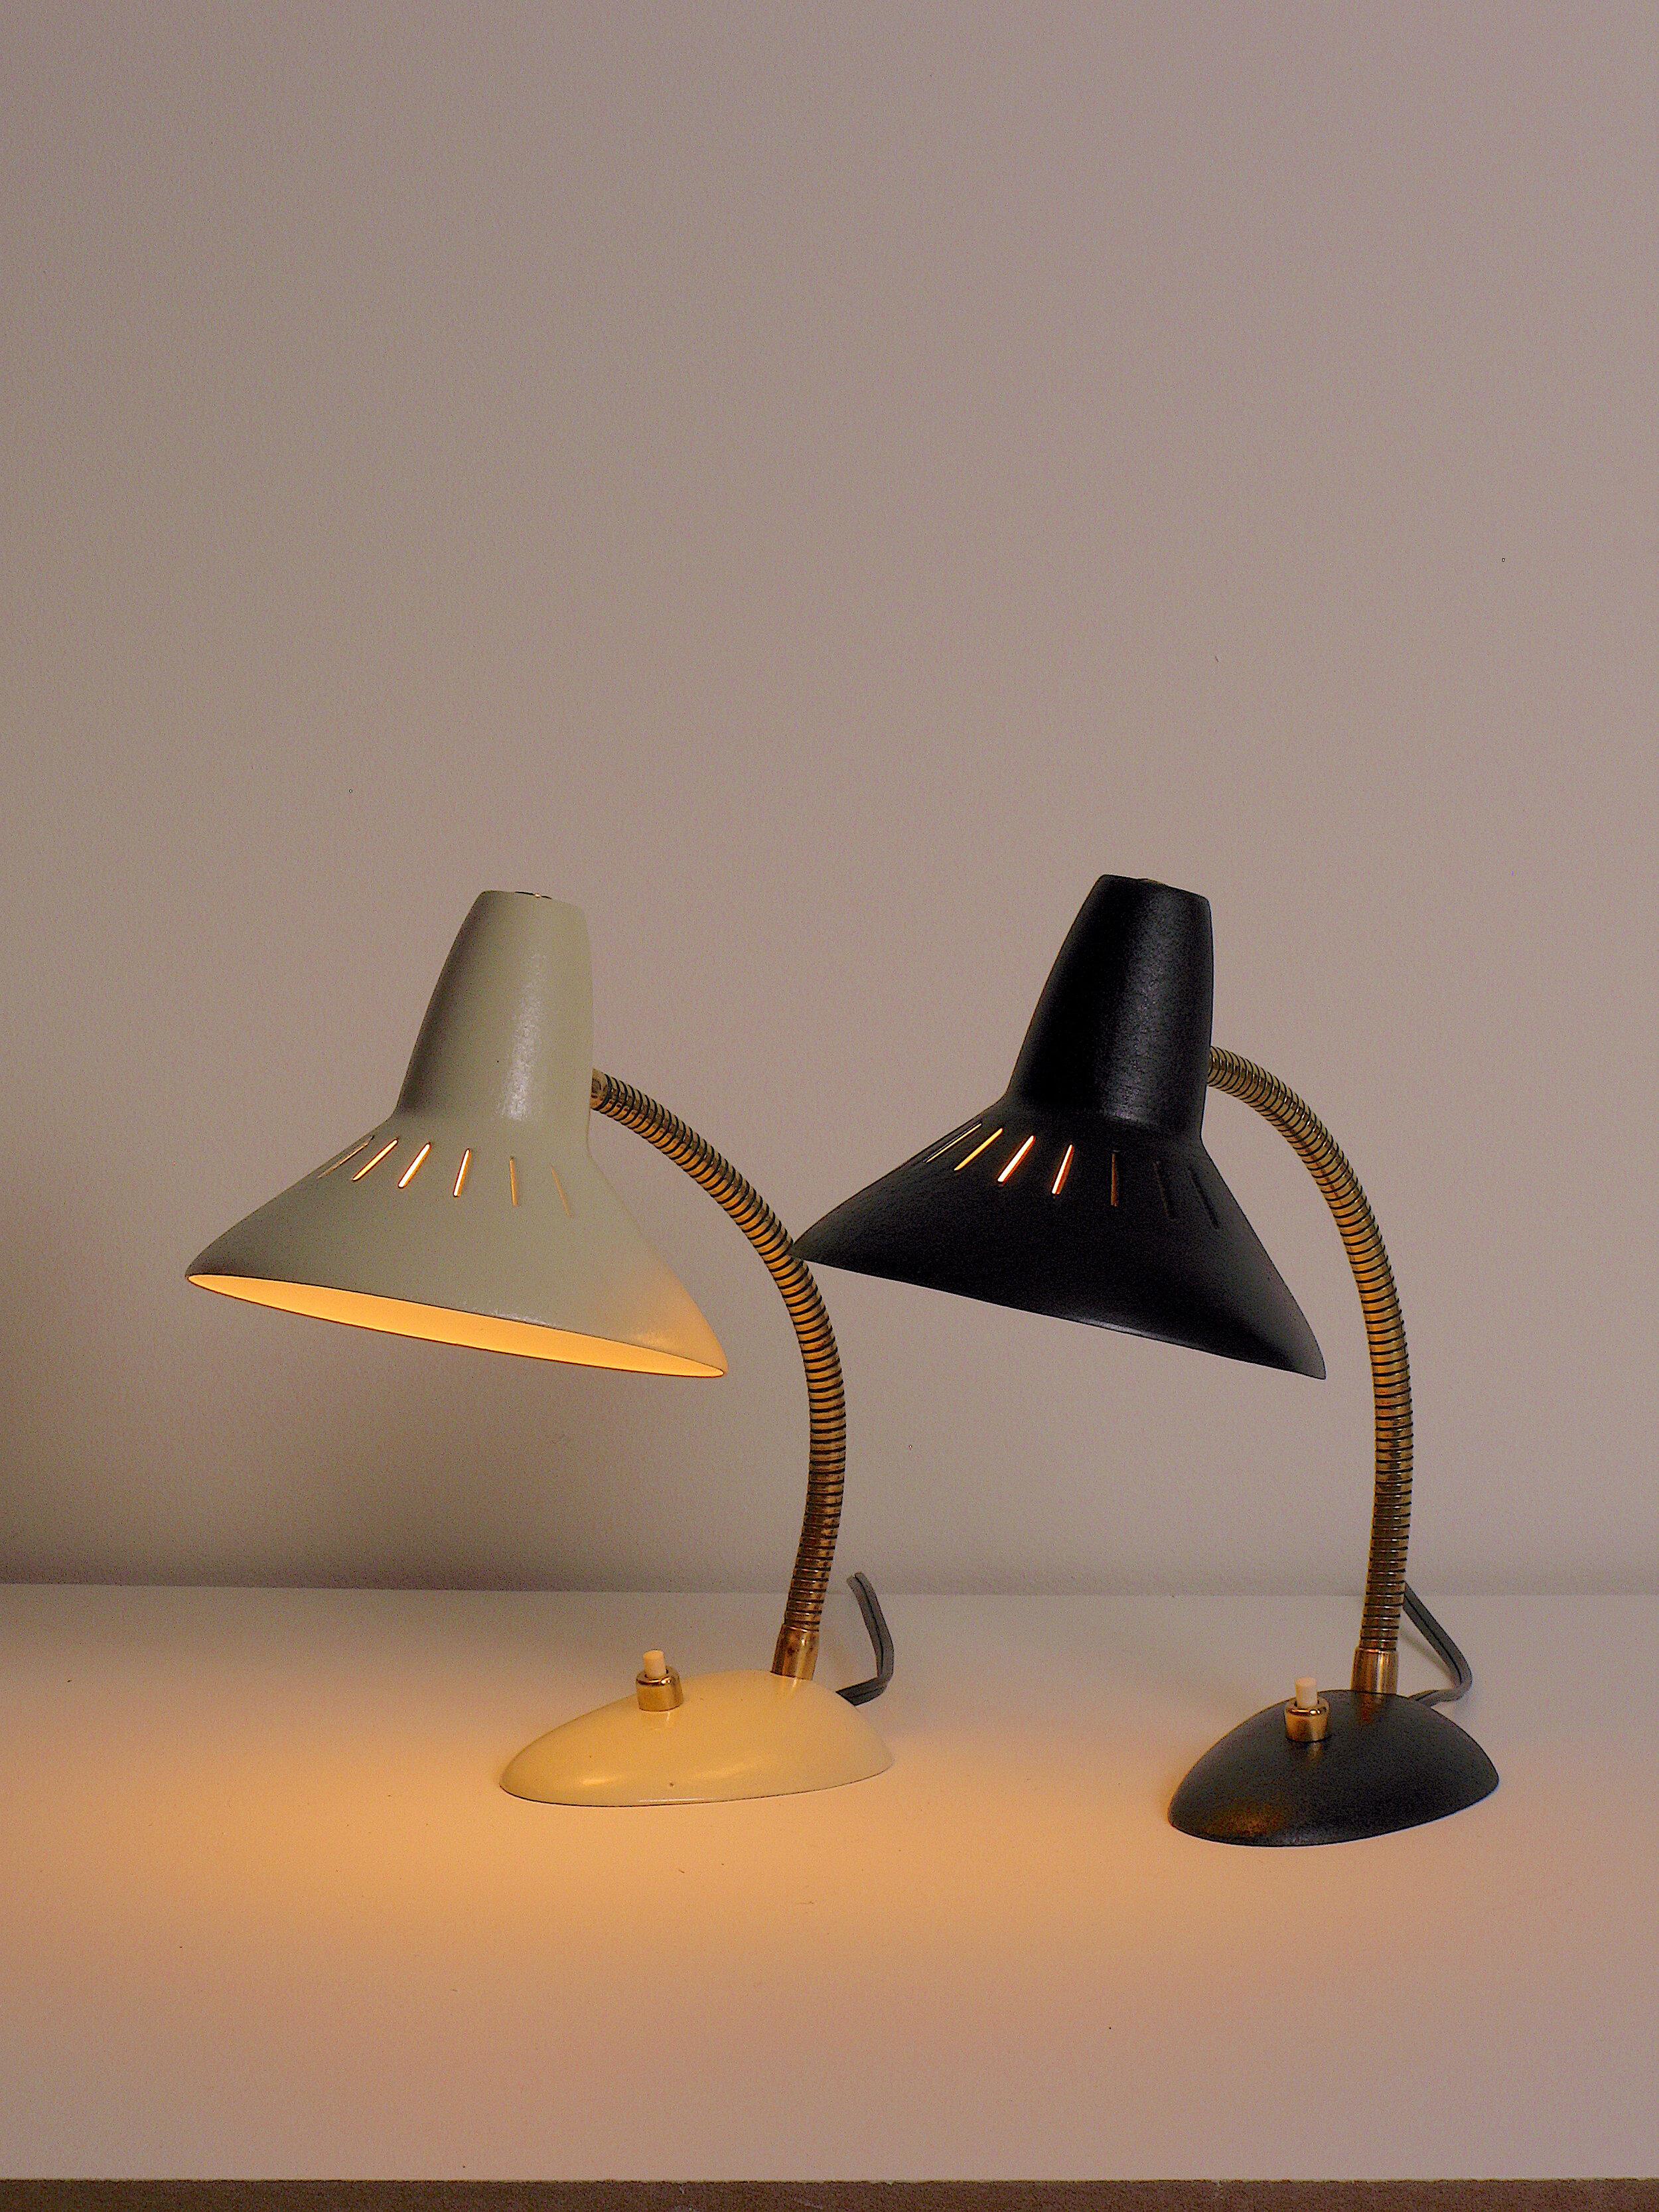 1950's German Desk Lamps In Good Condition For Sale In Montréal, QC